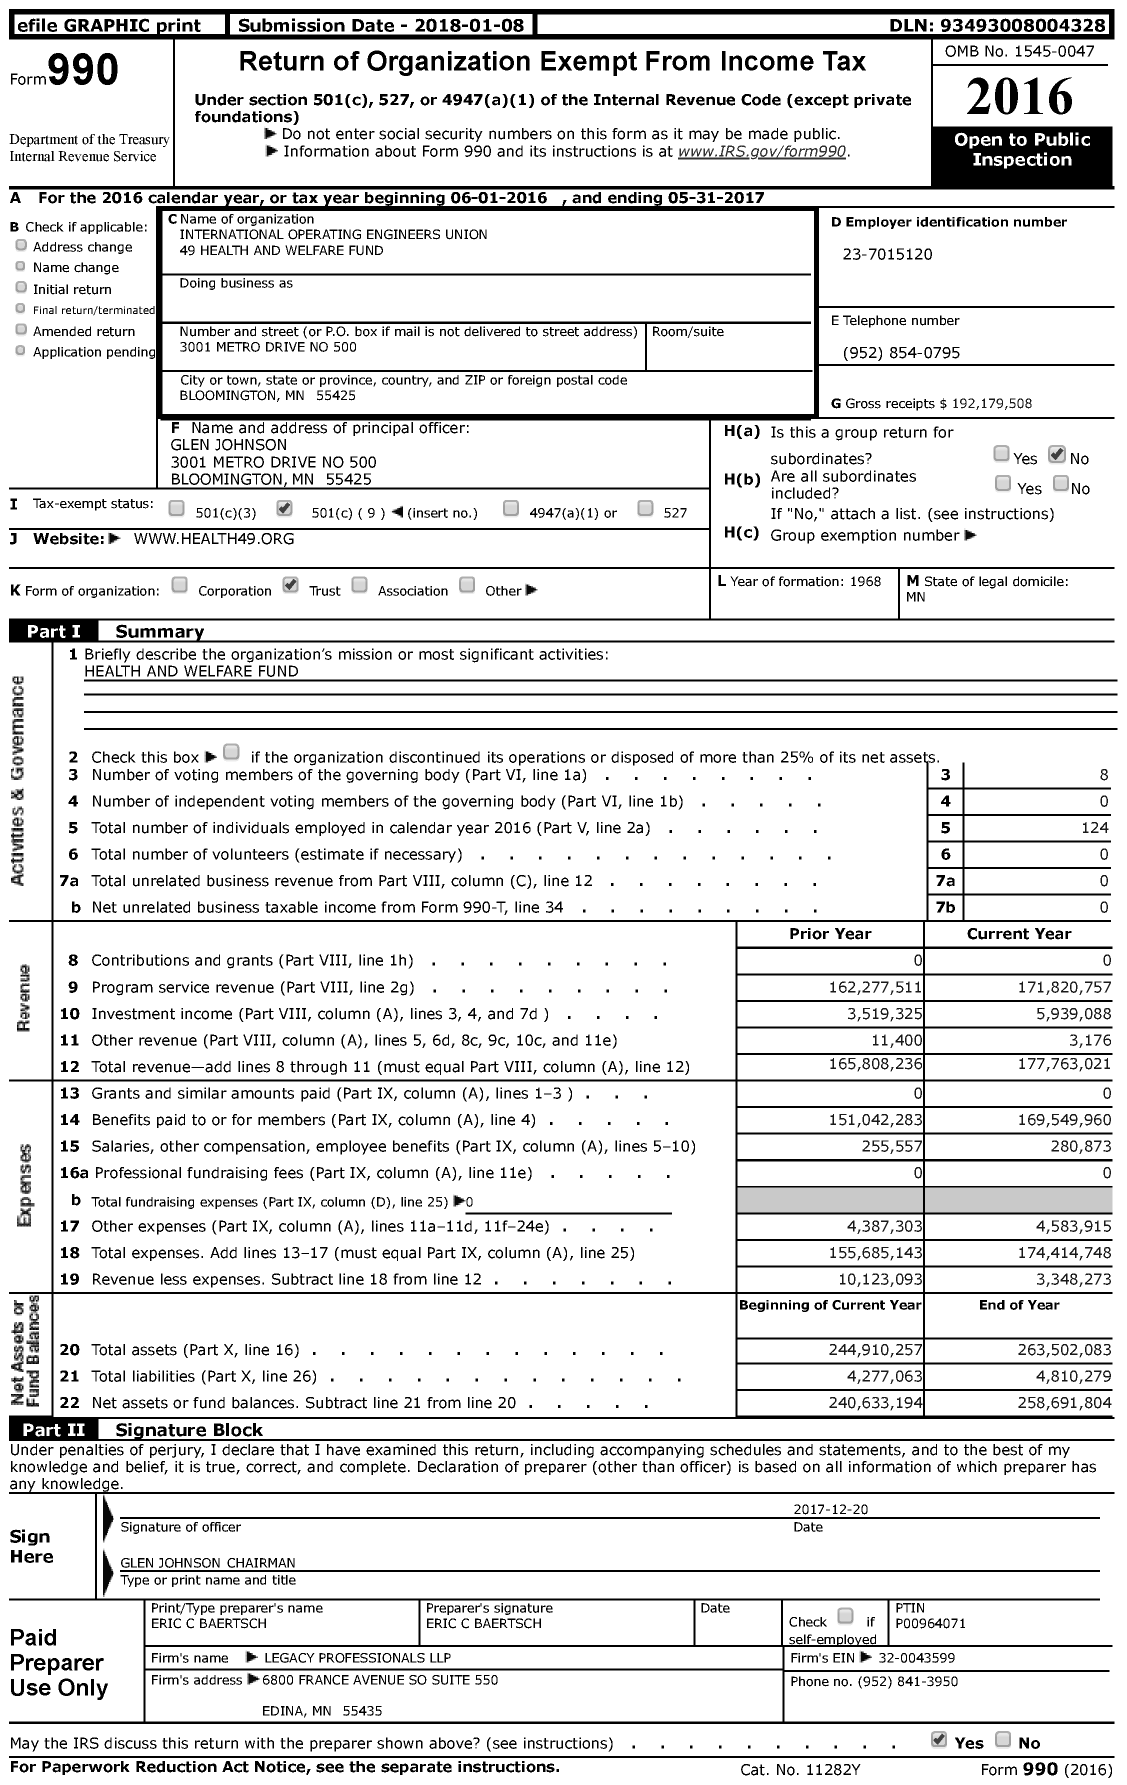 Image of first page of 2016 Form 990 for International Operating Engineers Union 49 Health and Welfare Fund